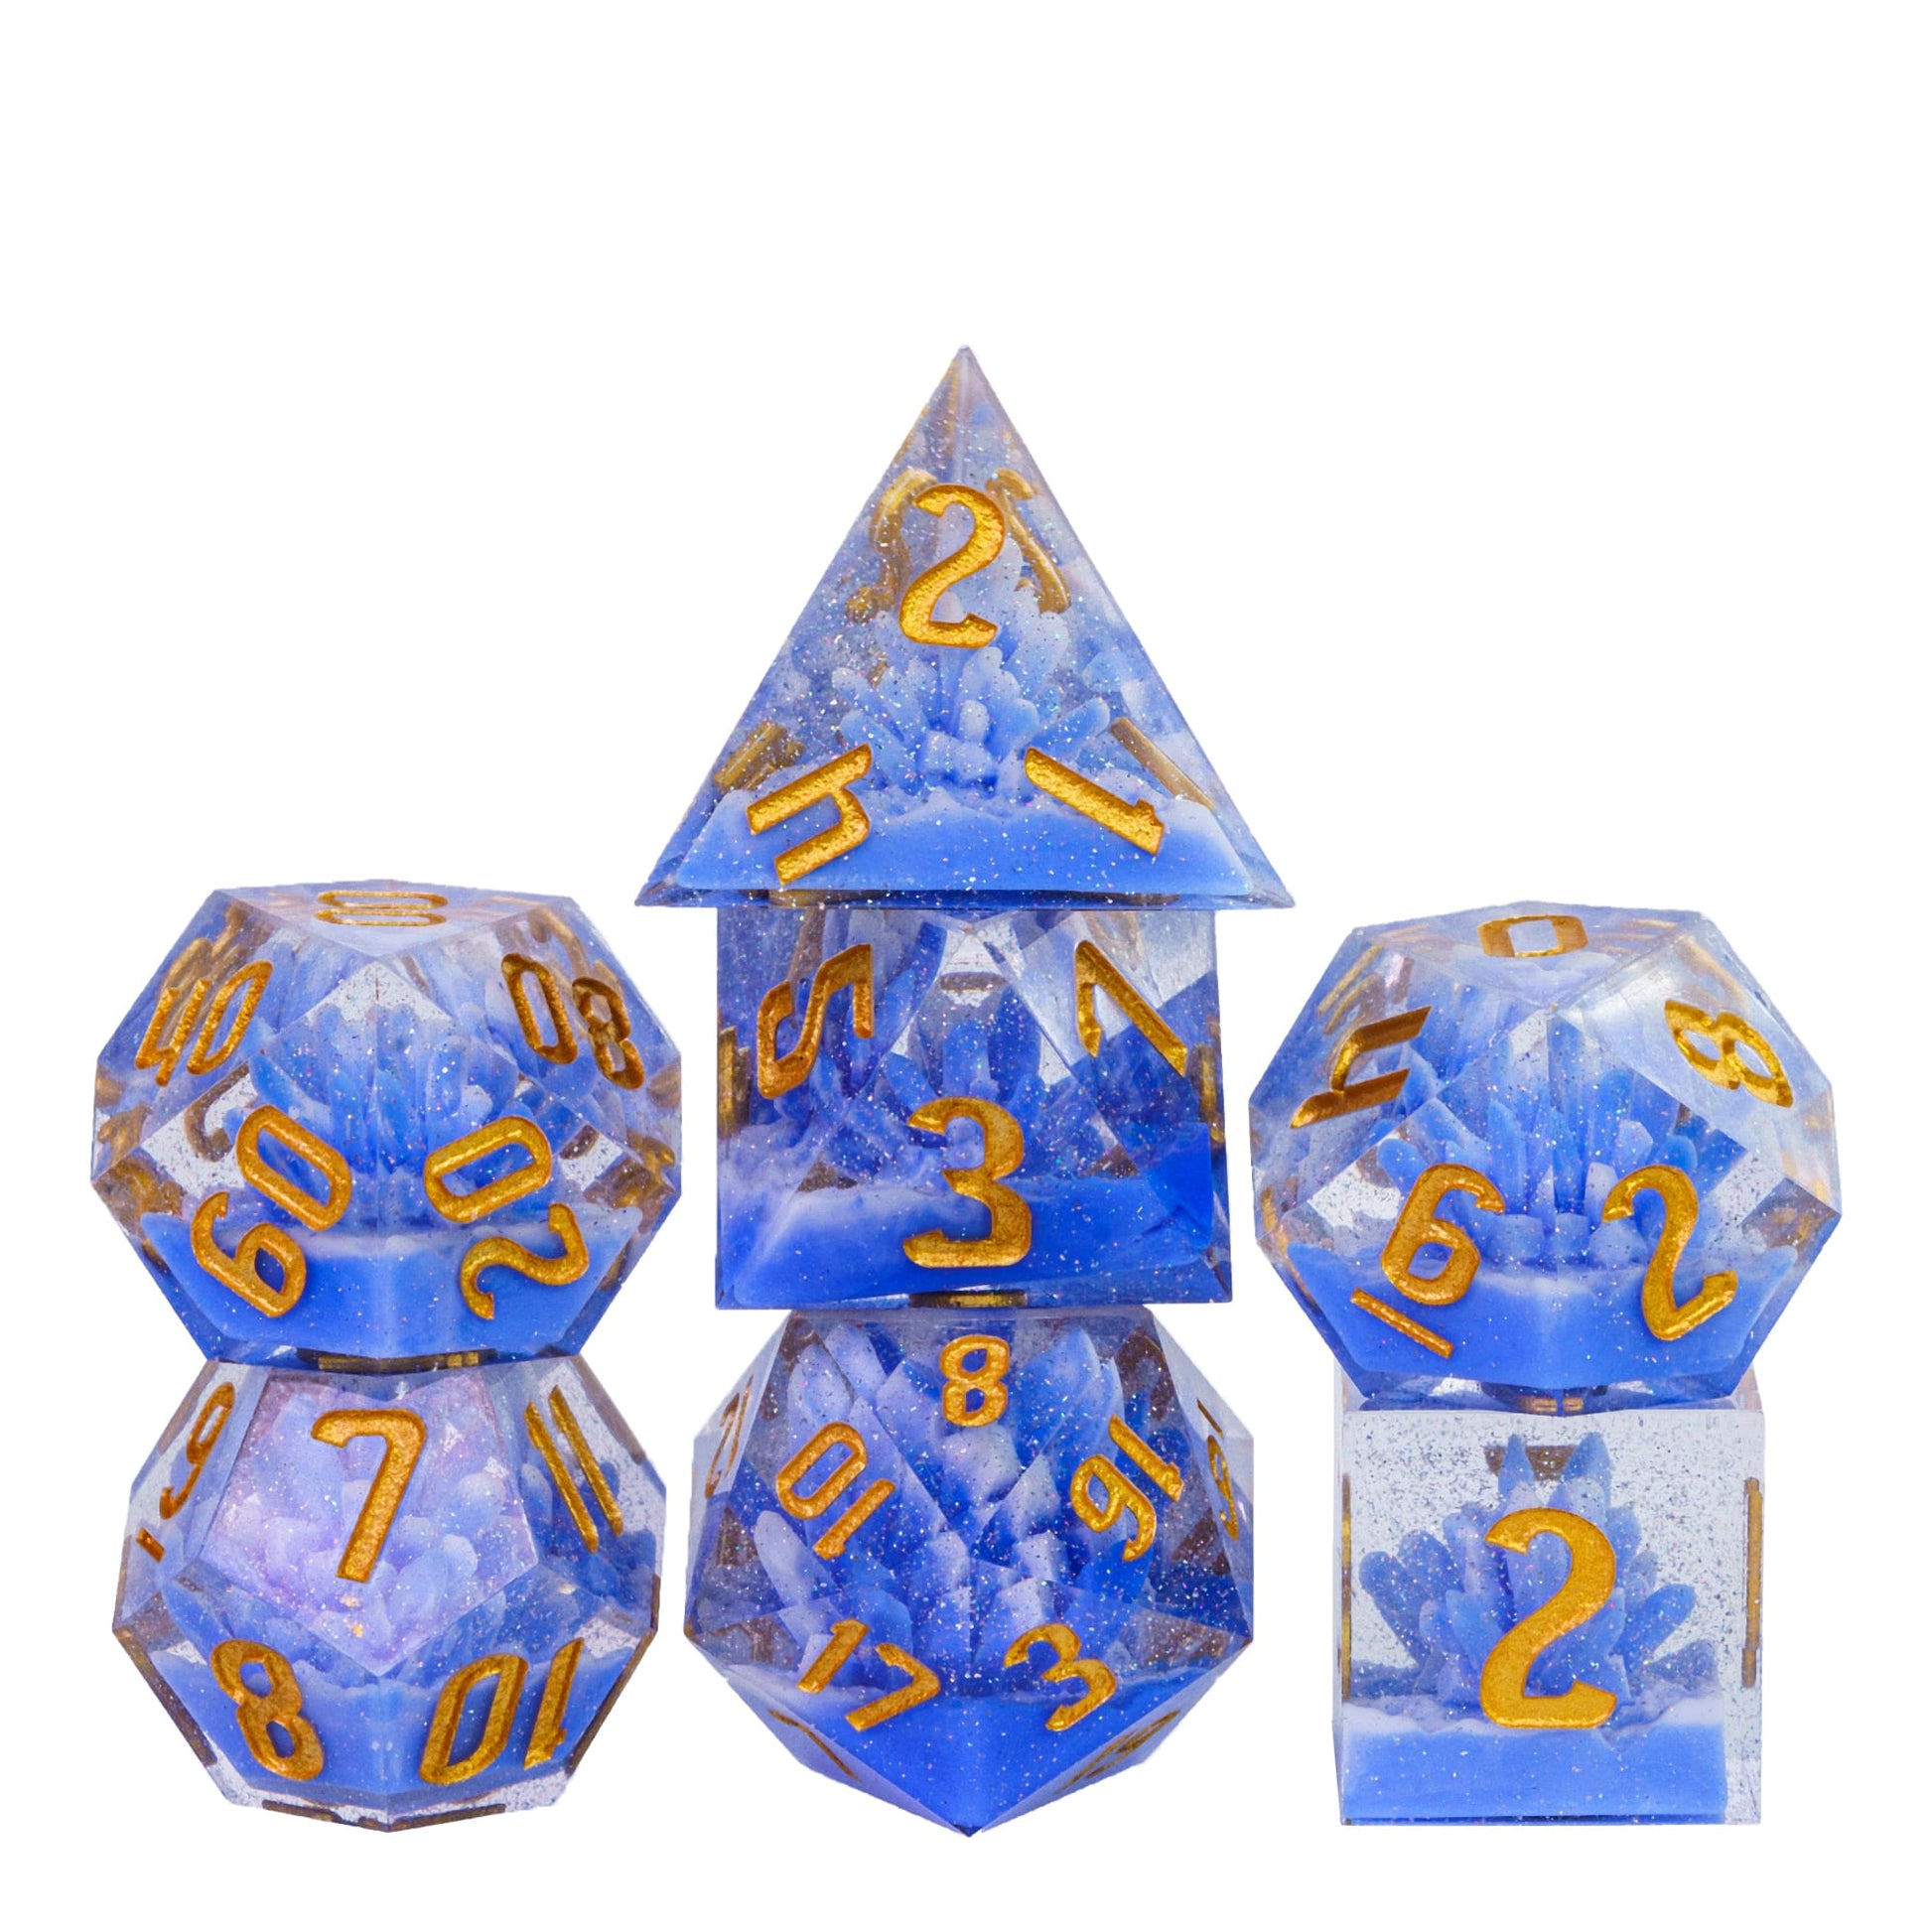 Blue crystal creation dnd dice set stacked on white background